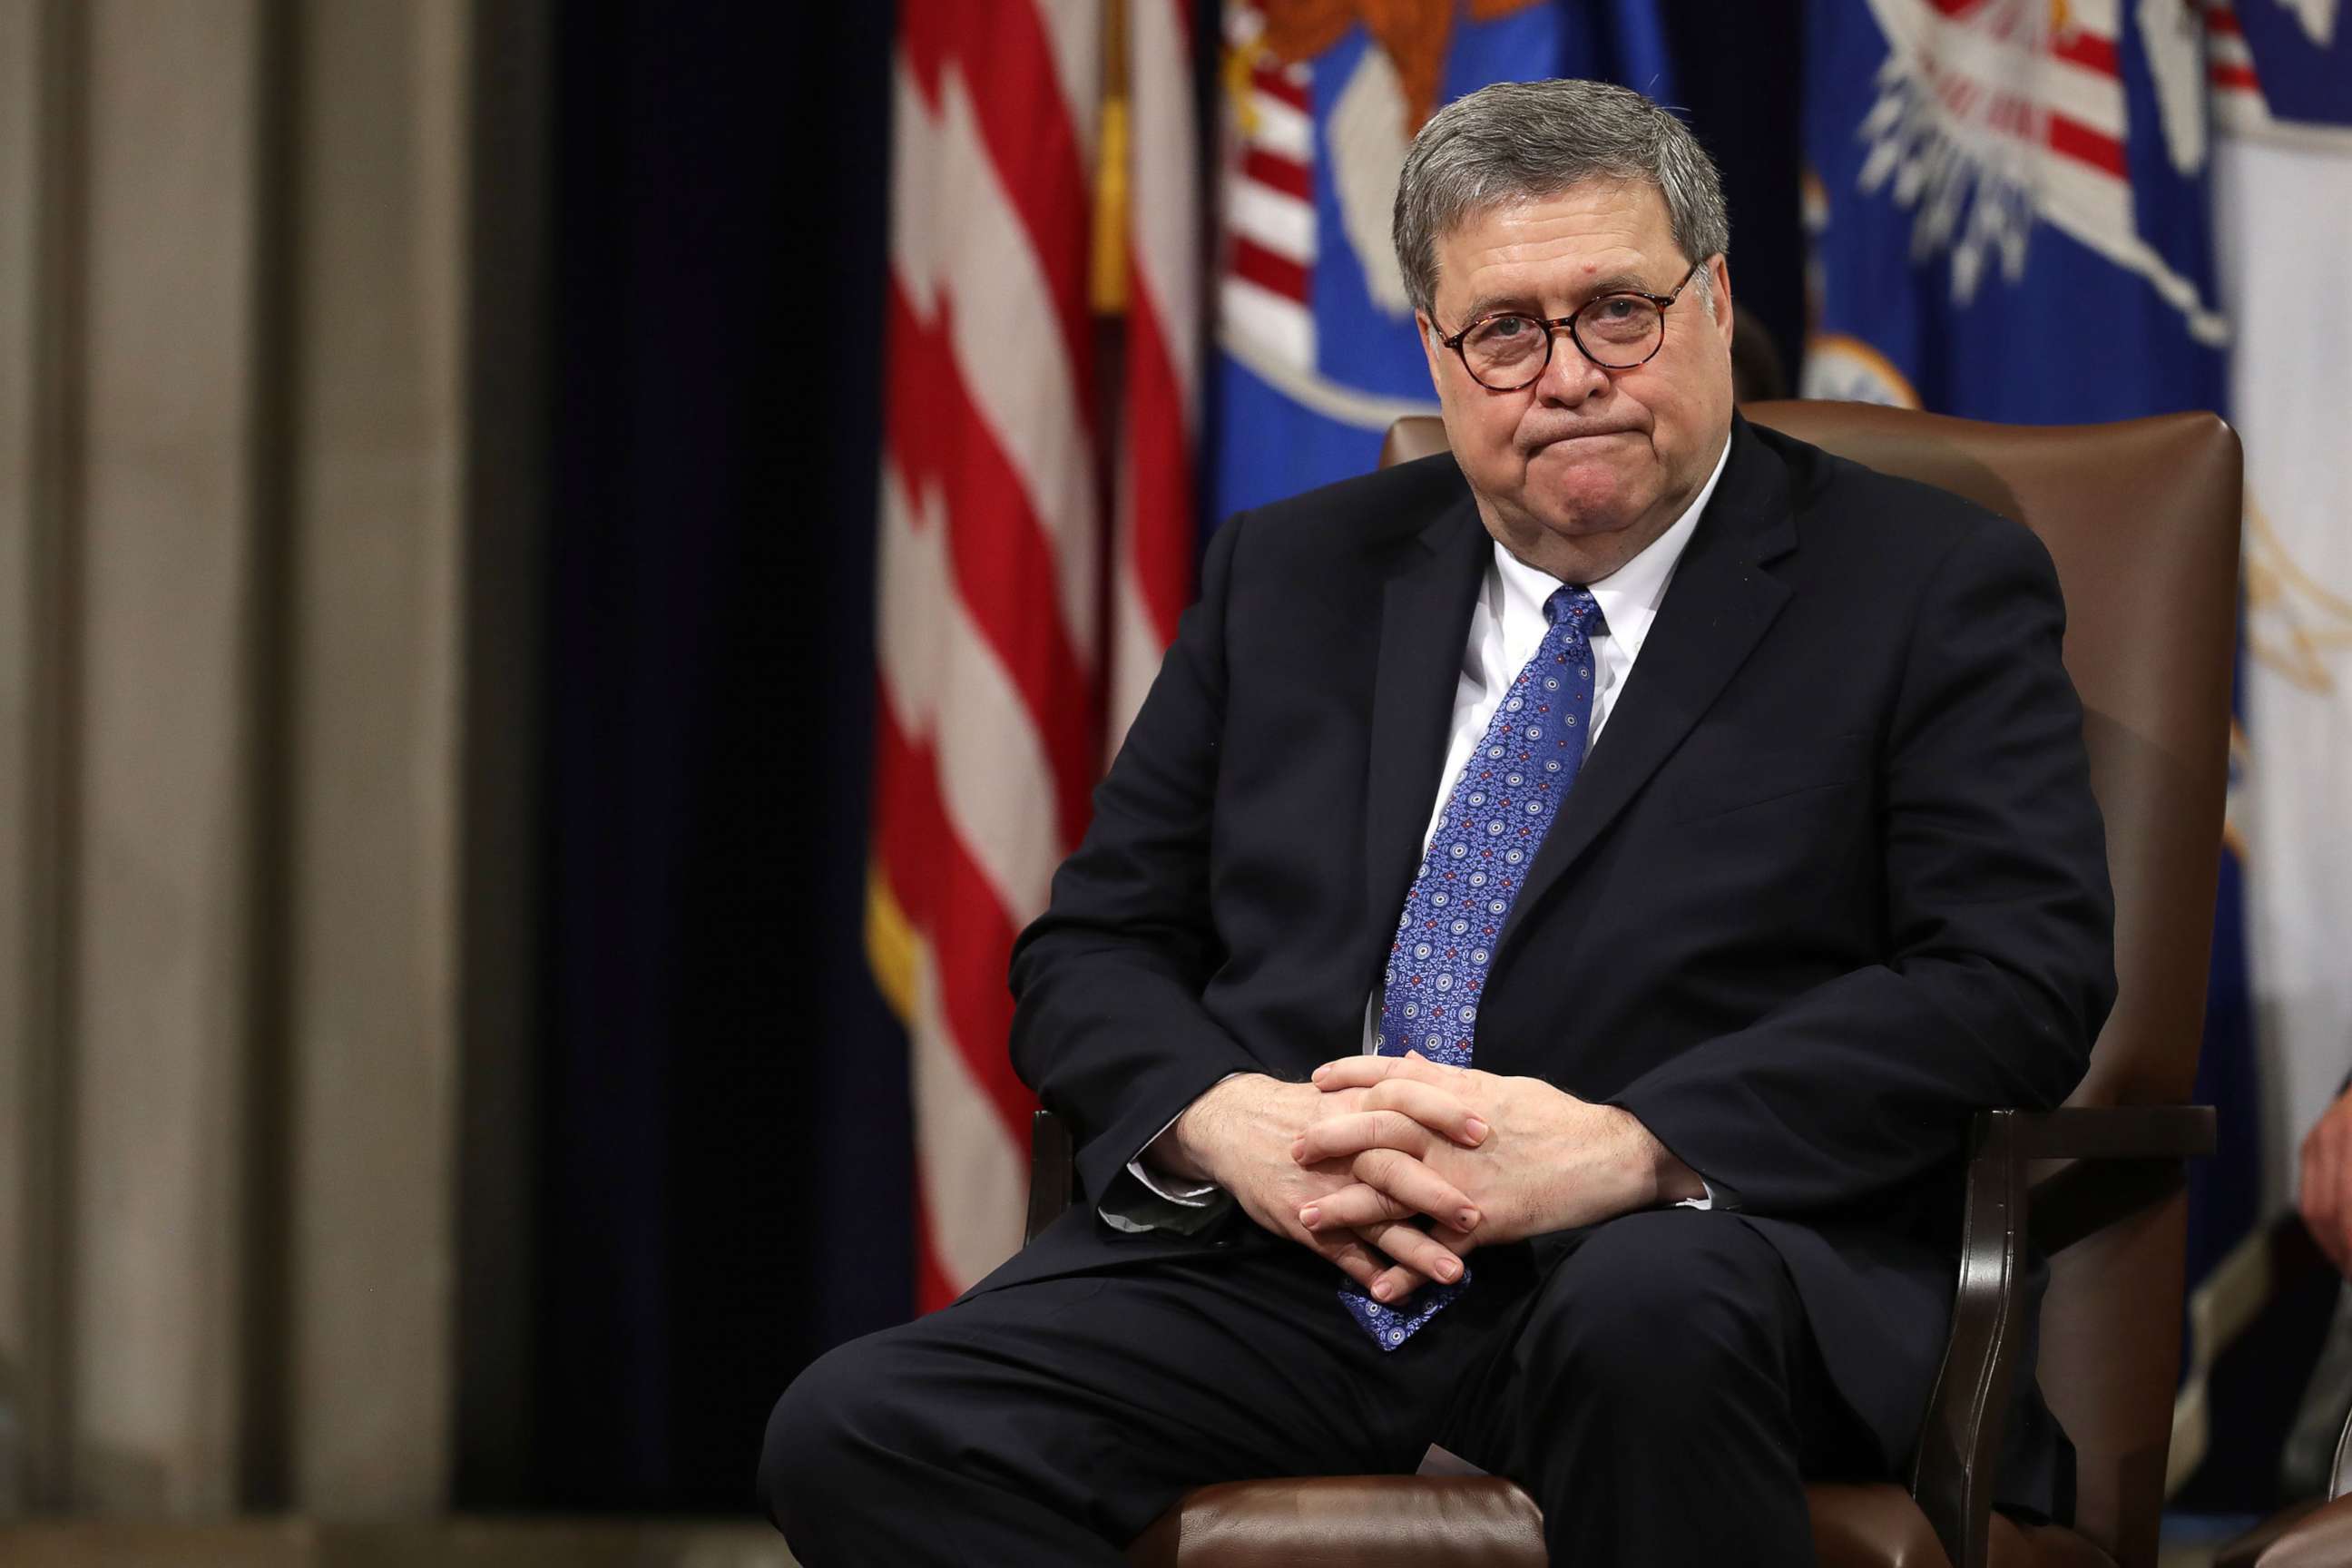 PHOTO: Attorney General William Barr attends attends an event the Robert F. Kennedy Main Justice Building, May 9, 2019 in Washington, D.C.